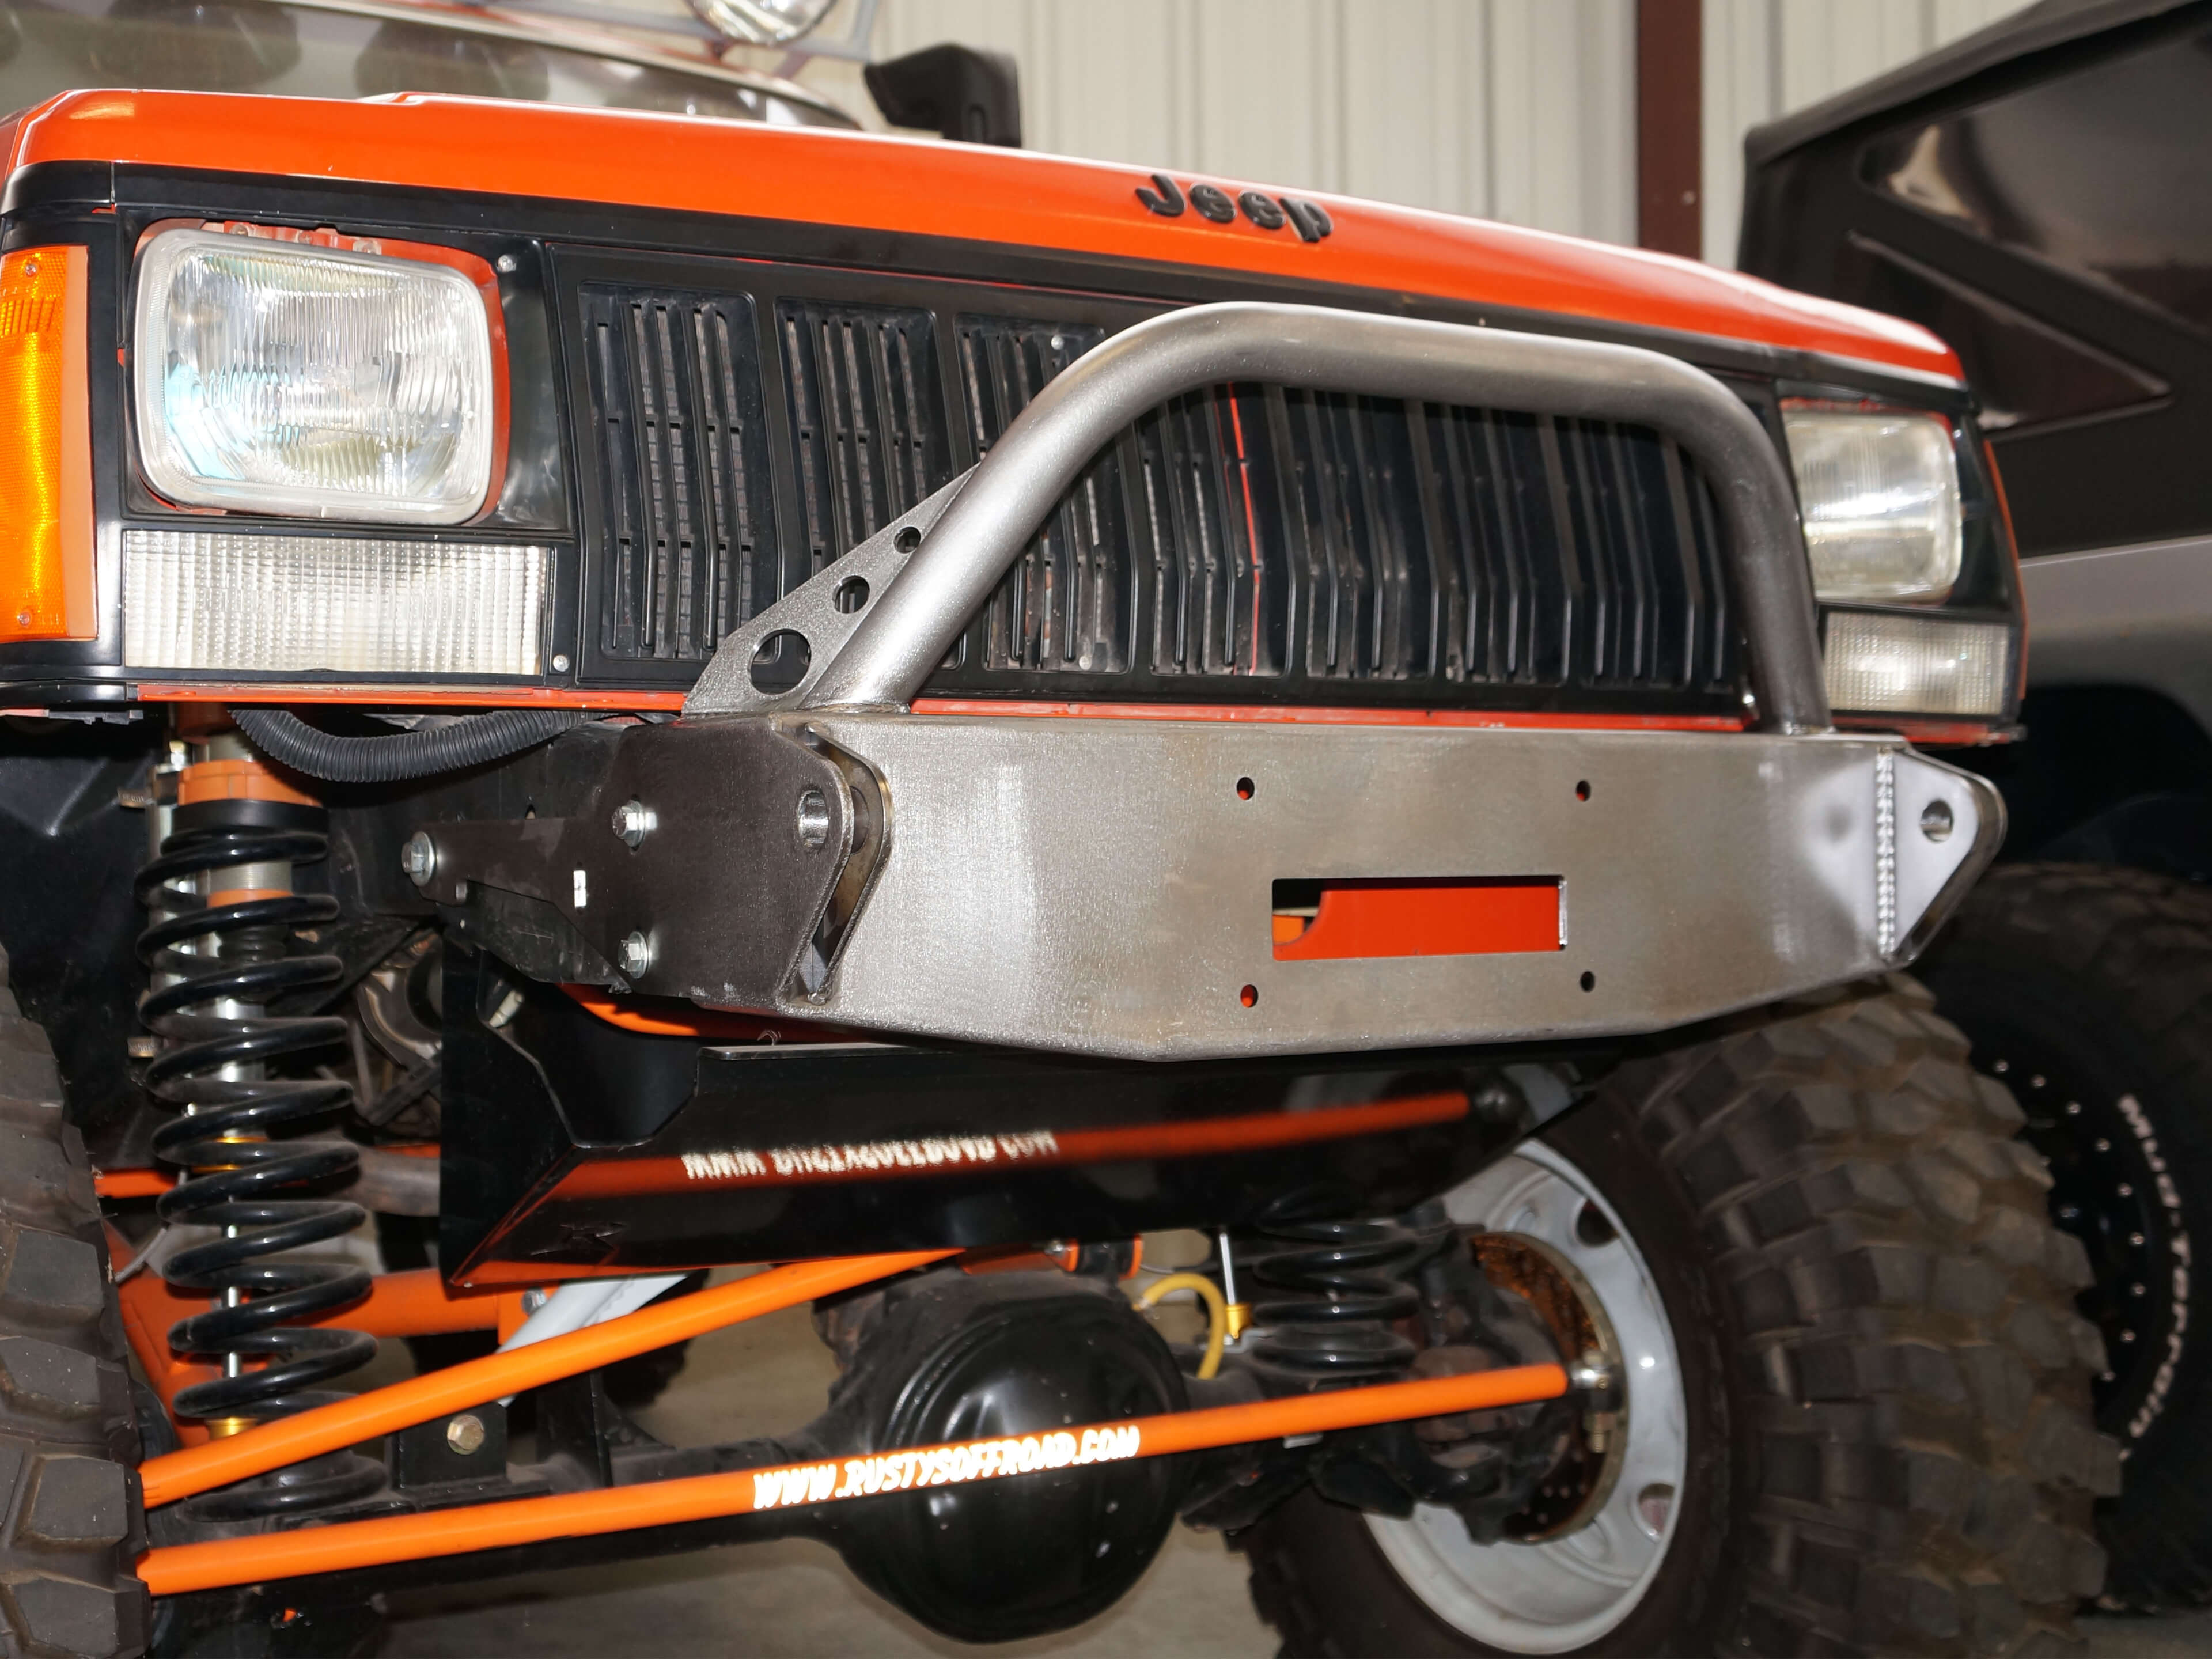 Rusty's Off-Road – Rusty's Off-Road Products